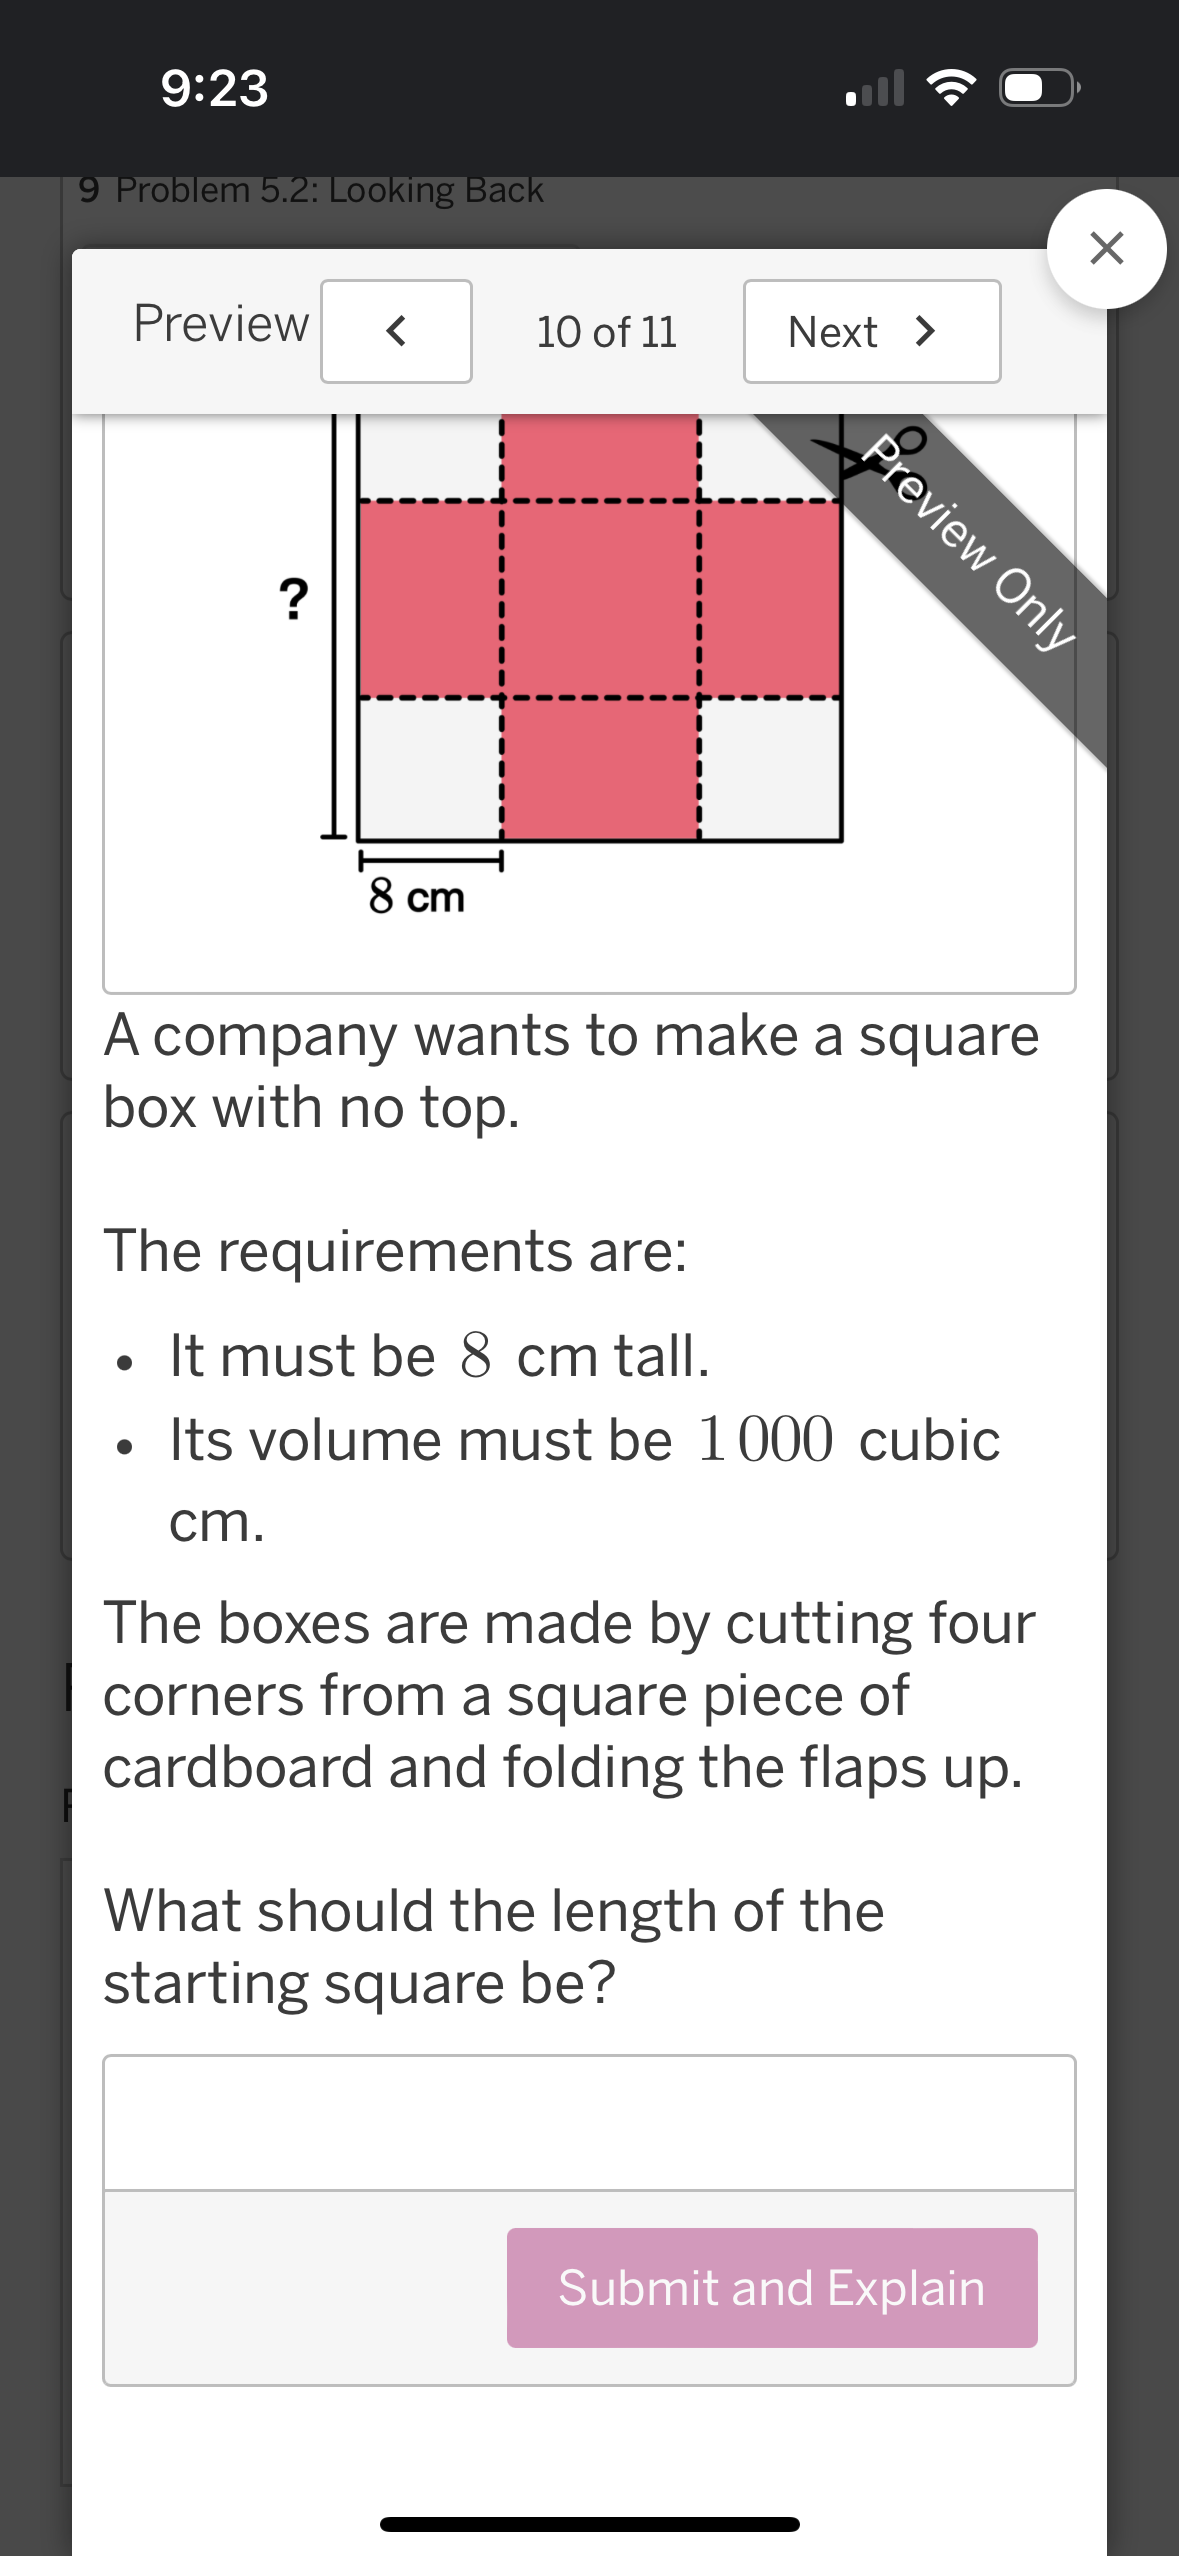 9:23
9 Problem 5.2: Looking Back
Preview
<
10 of 11
Next >
?
☑
Preview Only
8 cm
A company wants to make a square
box with no top.
The requirements are:
•
It must be 8 cm tall.
•
Its volume must be 1000 cubic
cm.
The boxes are made by cutting four
corners from a square piece of
cardboard and folding the flaps up.
What should the length of the
starting square be?
Submit and Explain